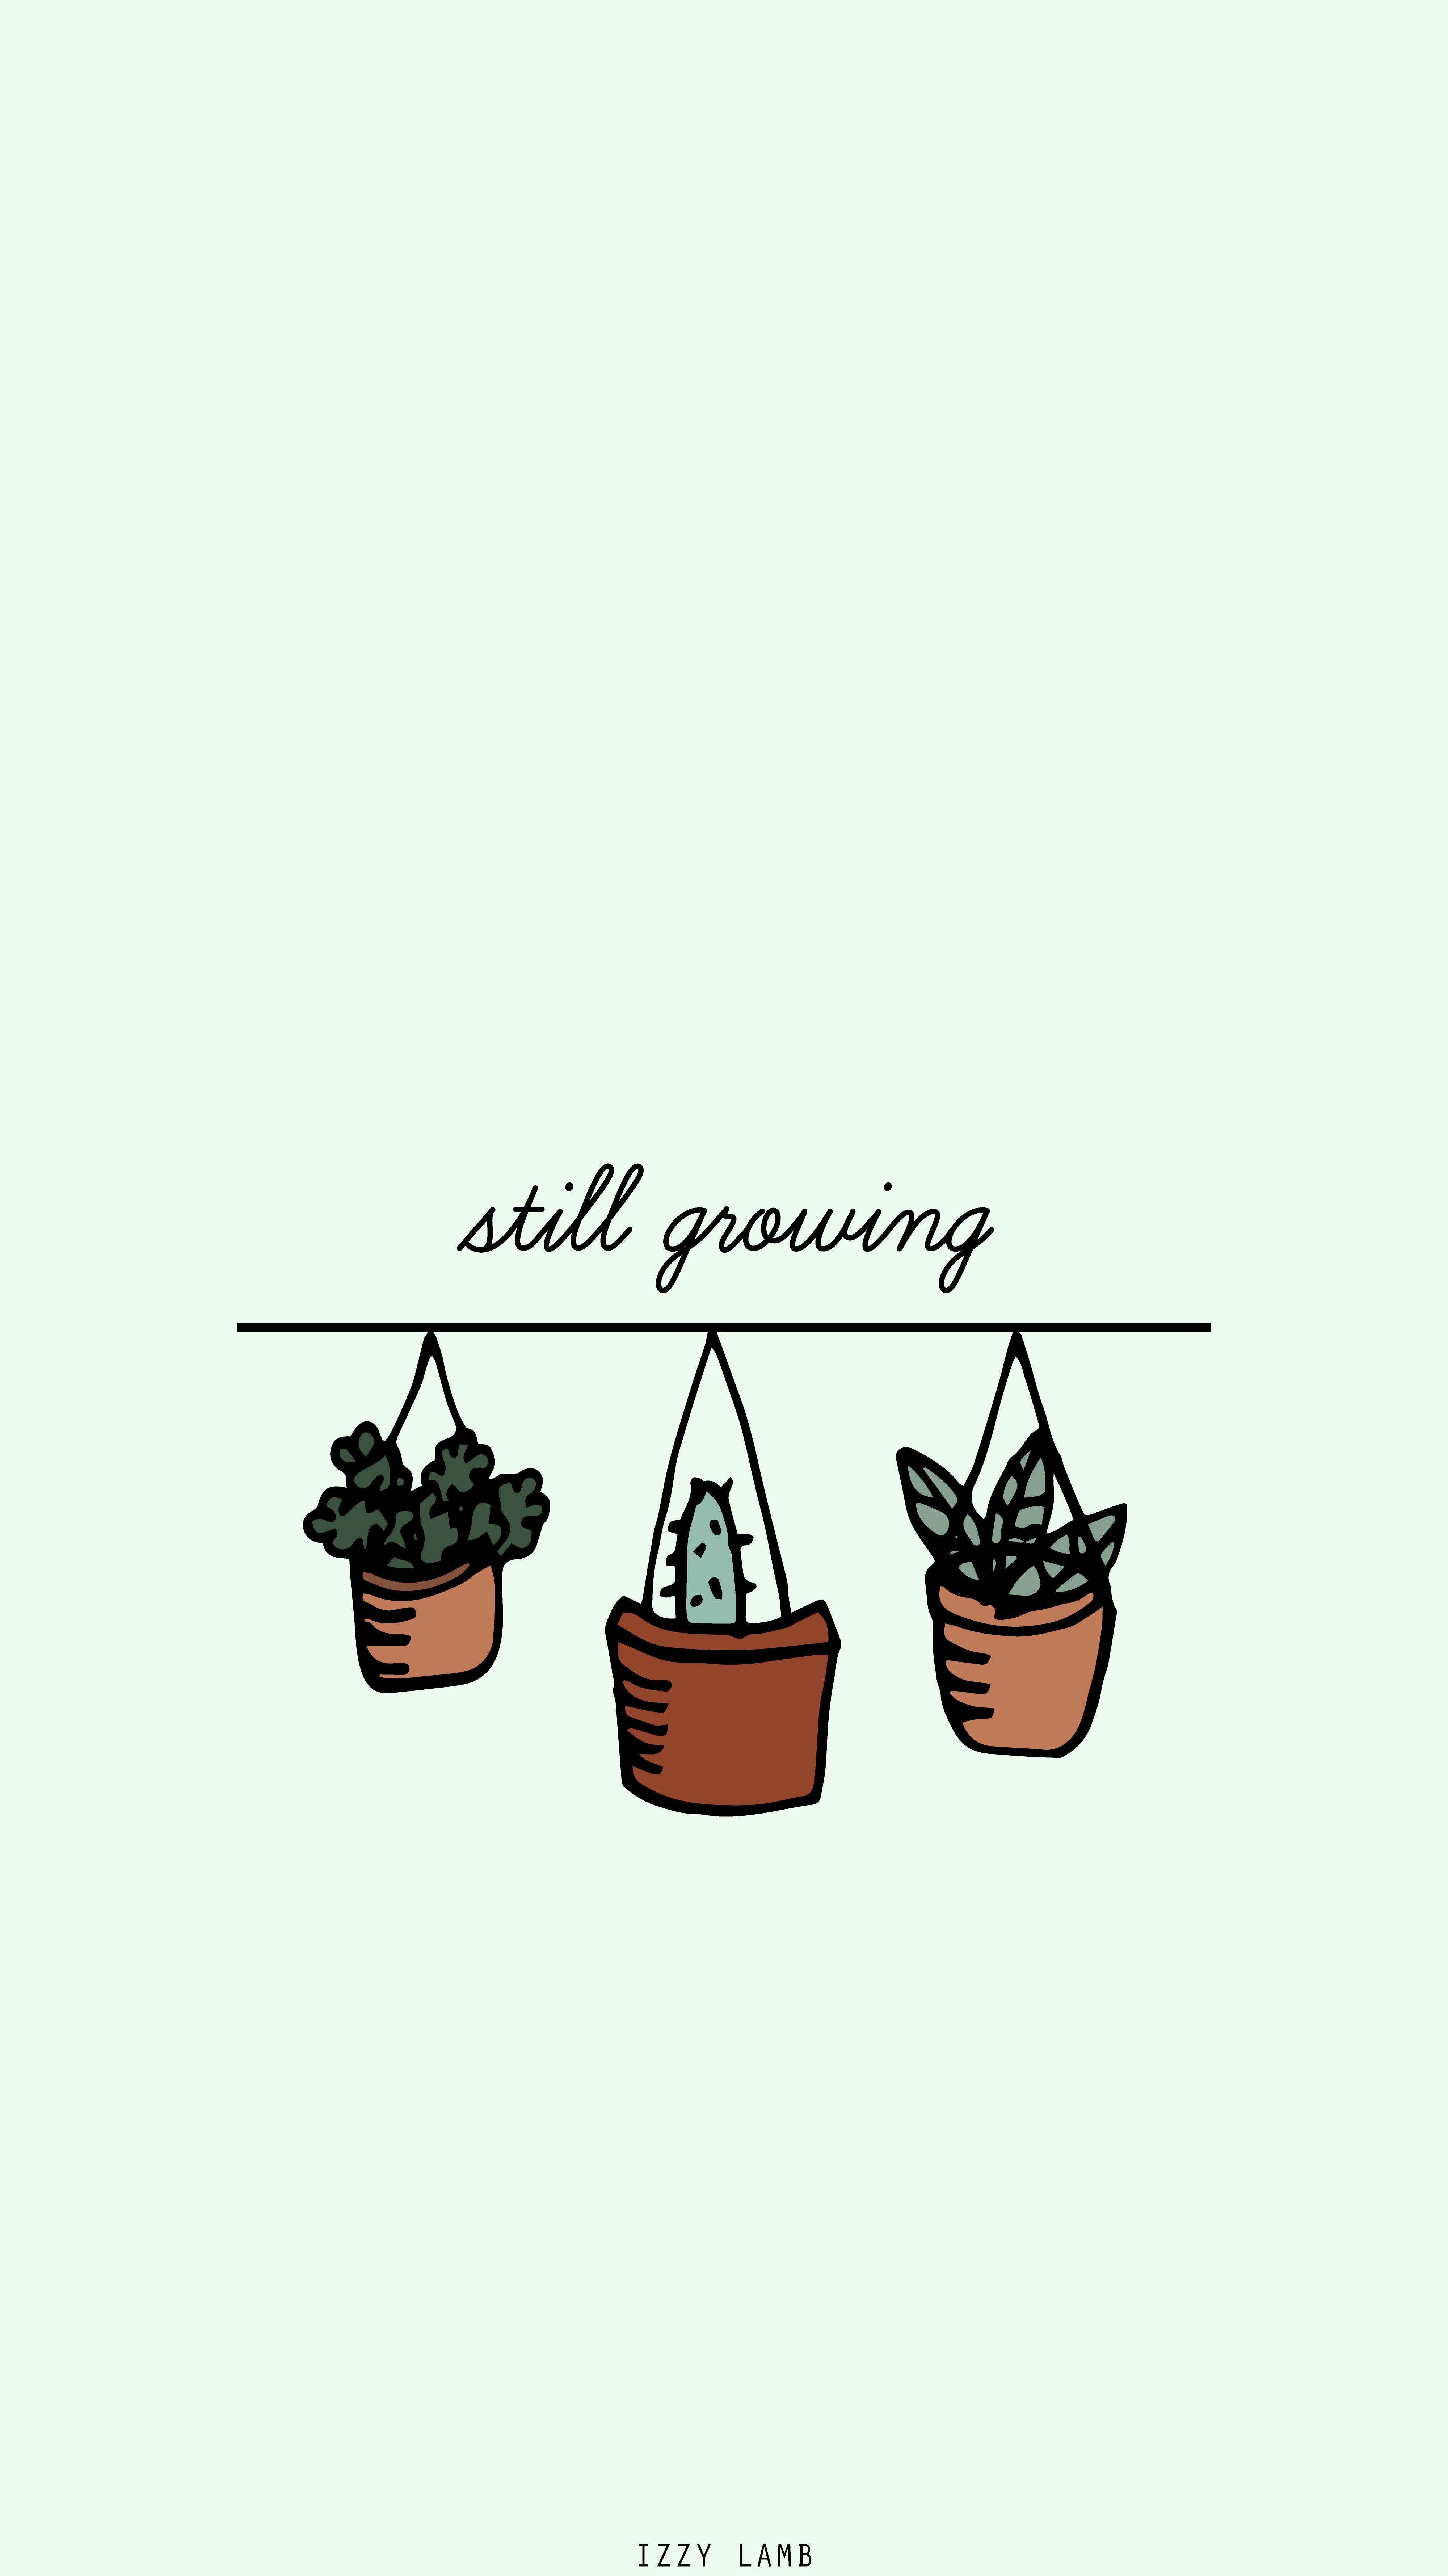 Free download wallpaper plants growth growing iphone